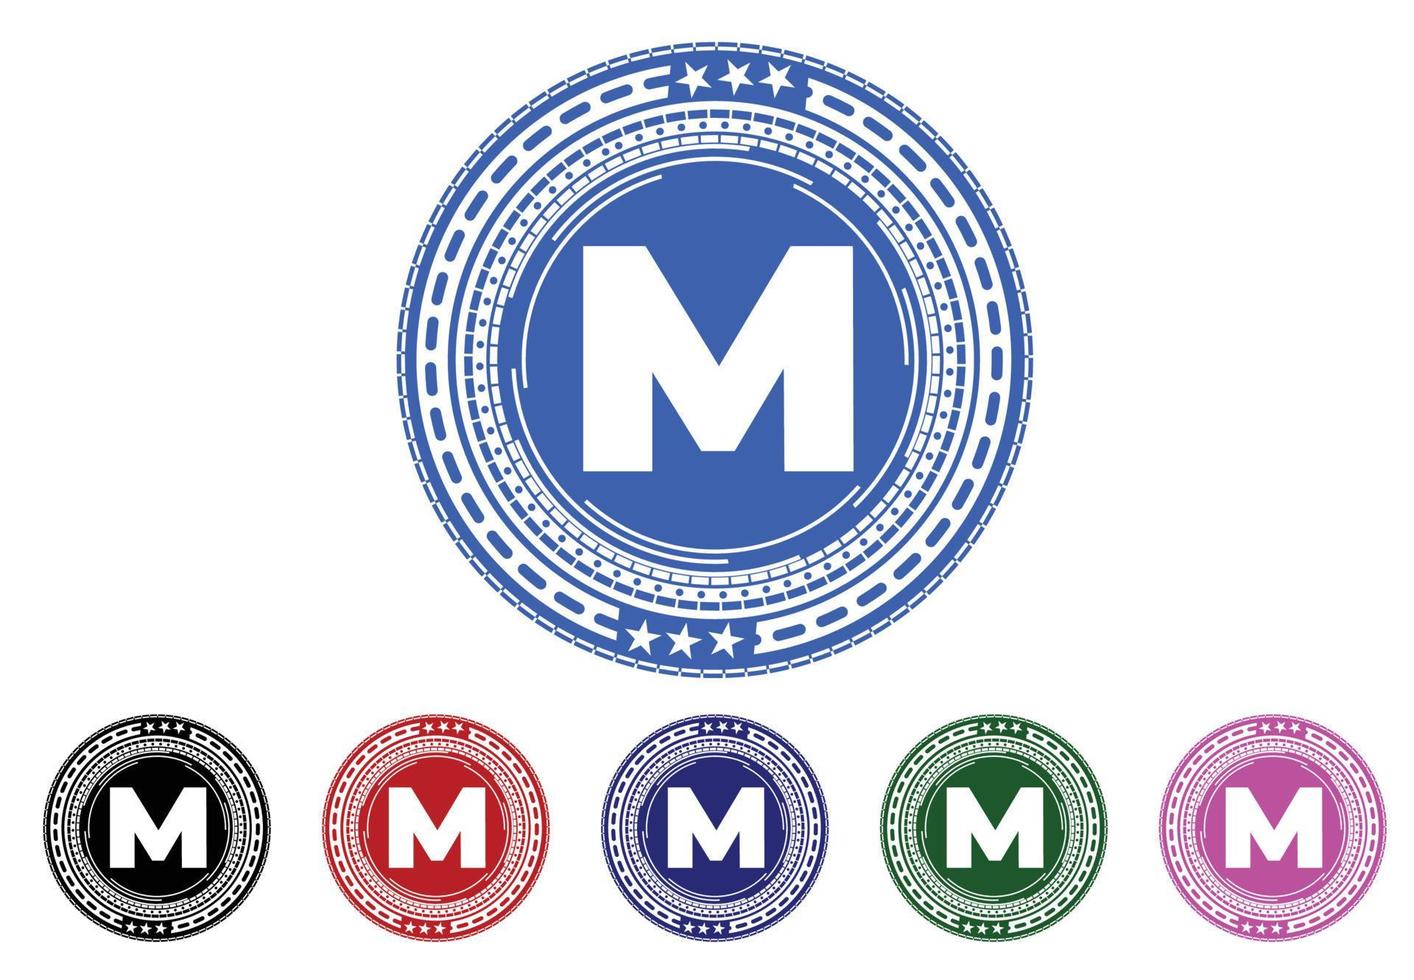 M letter new logo and icon design vector